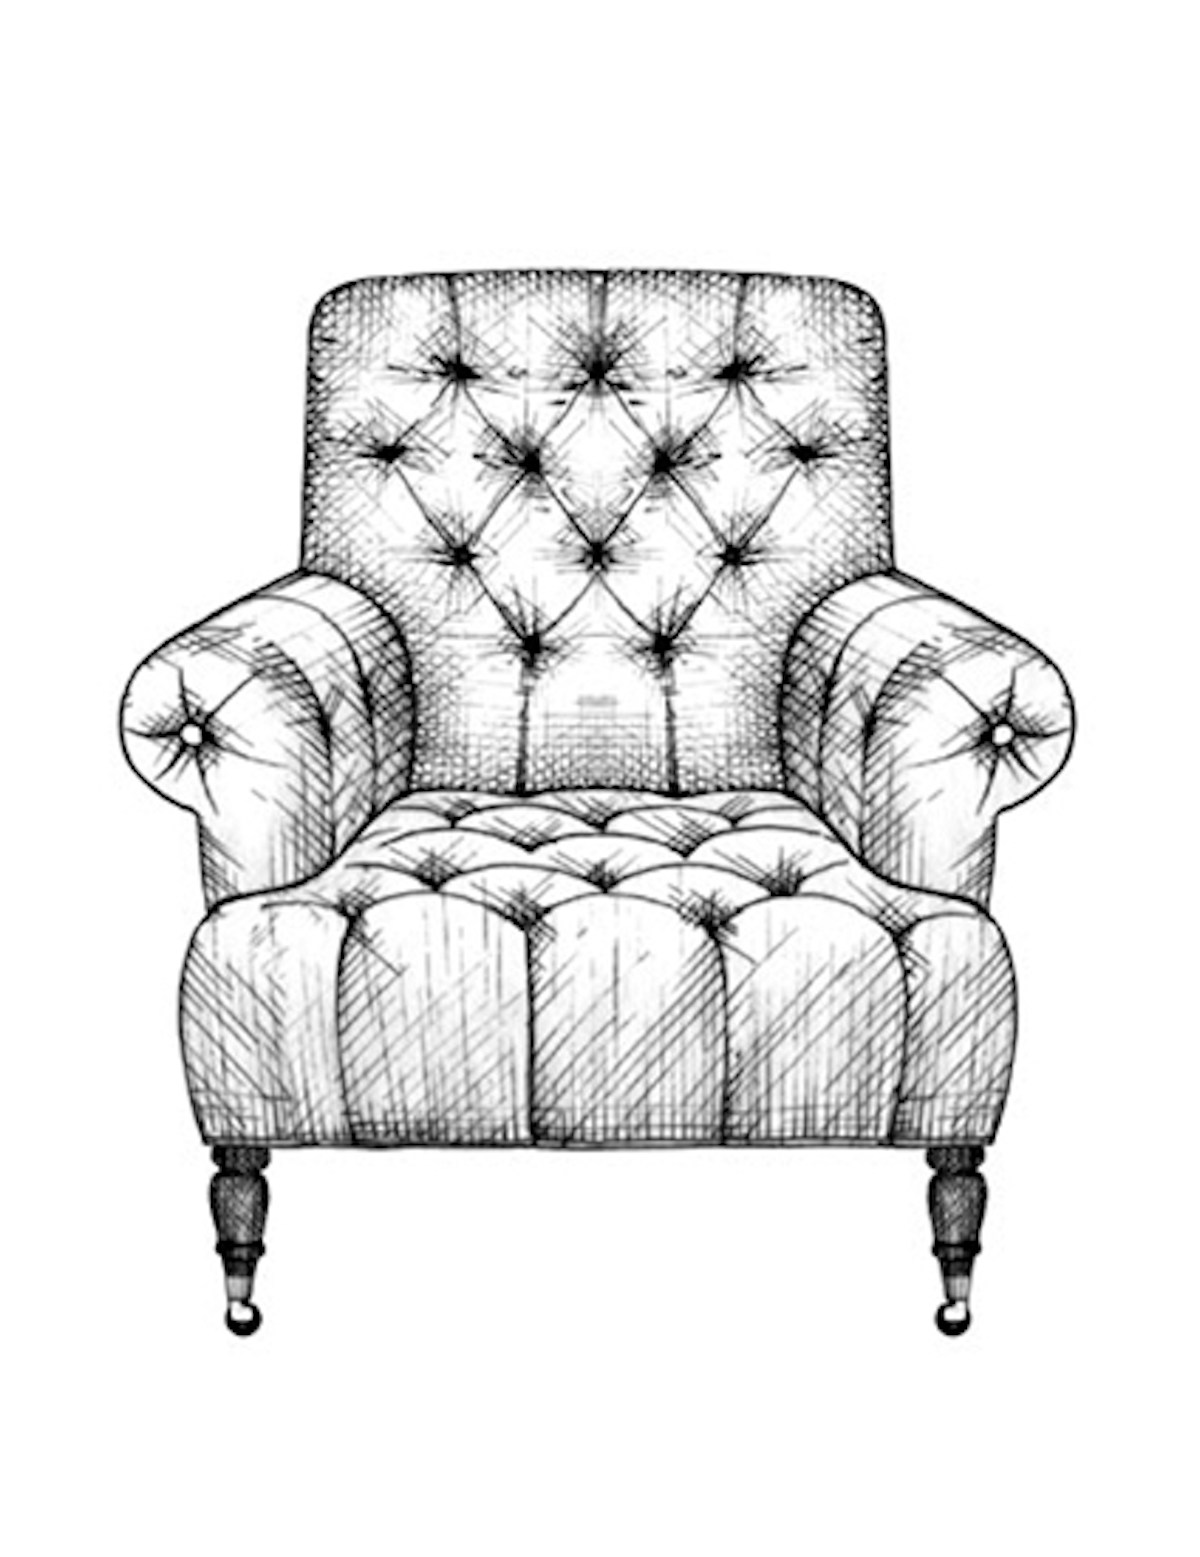 The Best of Chair Design - Top 10 Chair Styles - Chesterfield club chair